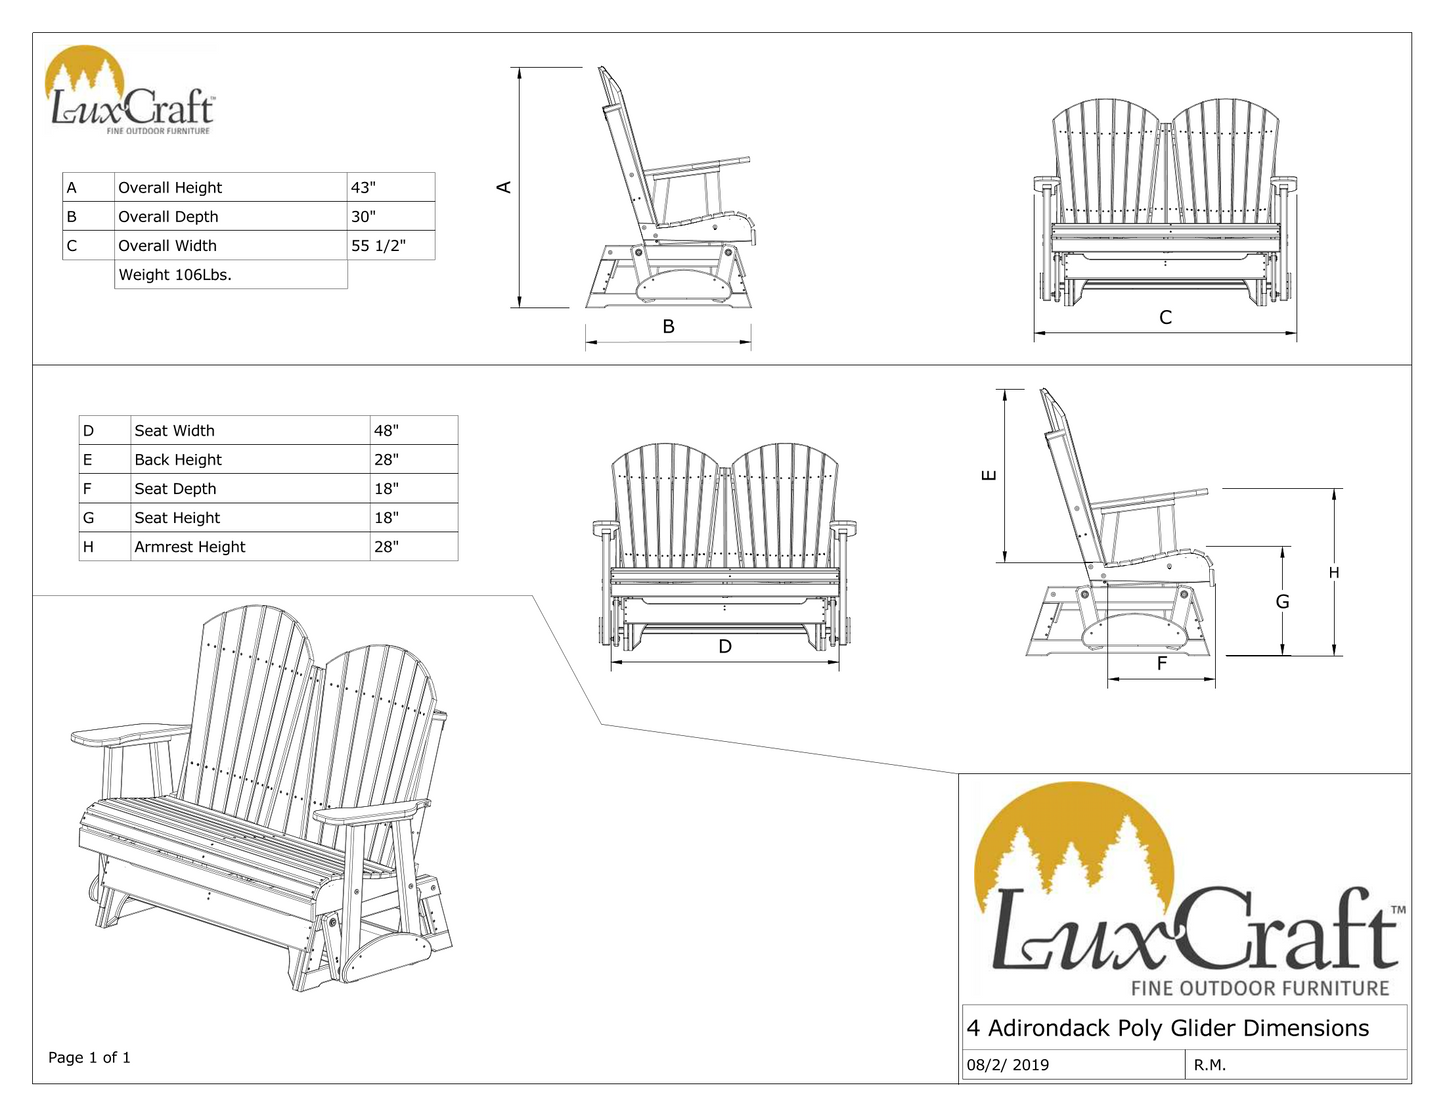 luxcraft recycled plastic 4' adirondack glider chair dimensions page